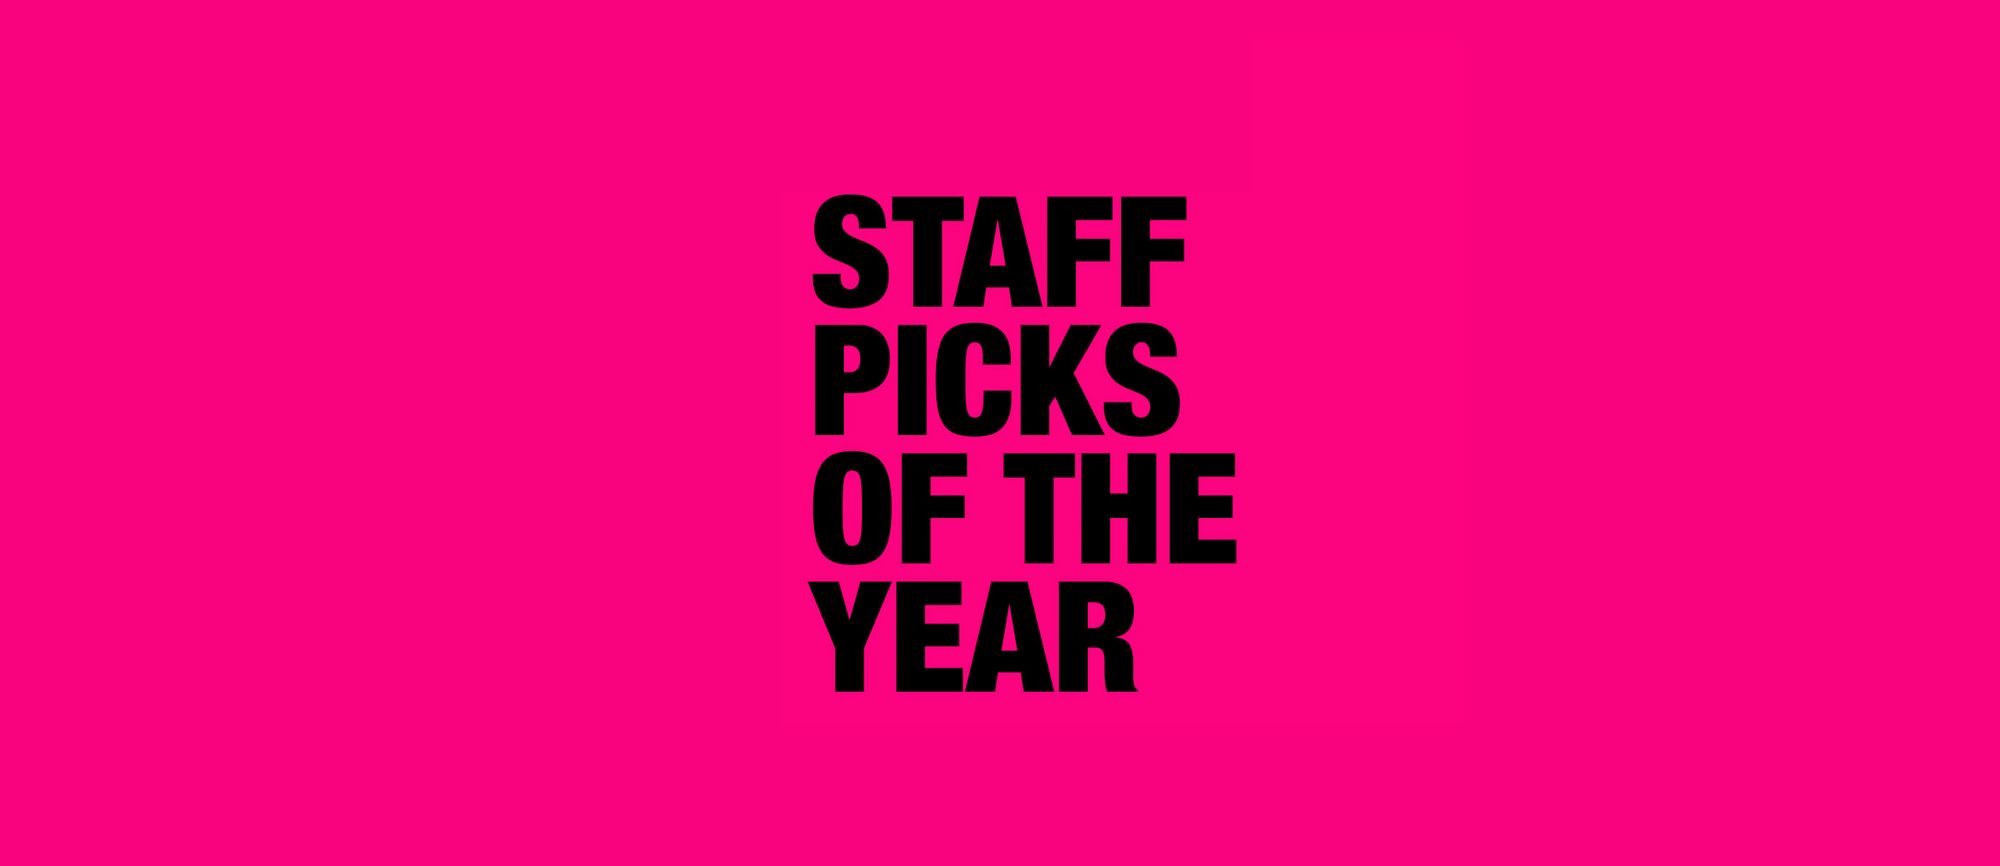 Staff Picks of the Year 2020